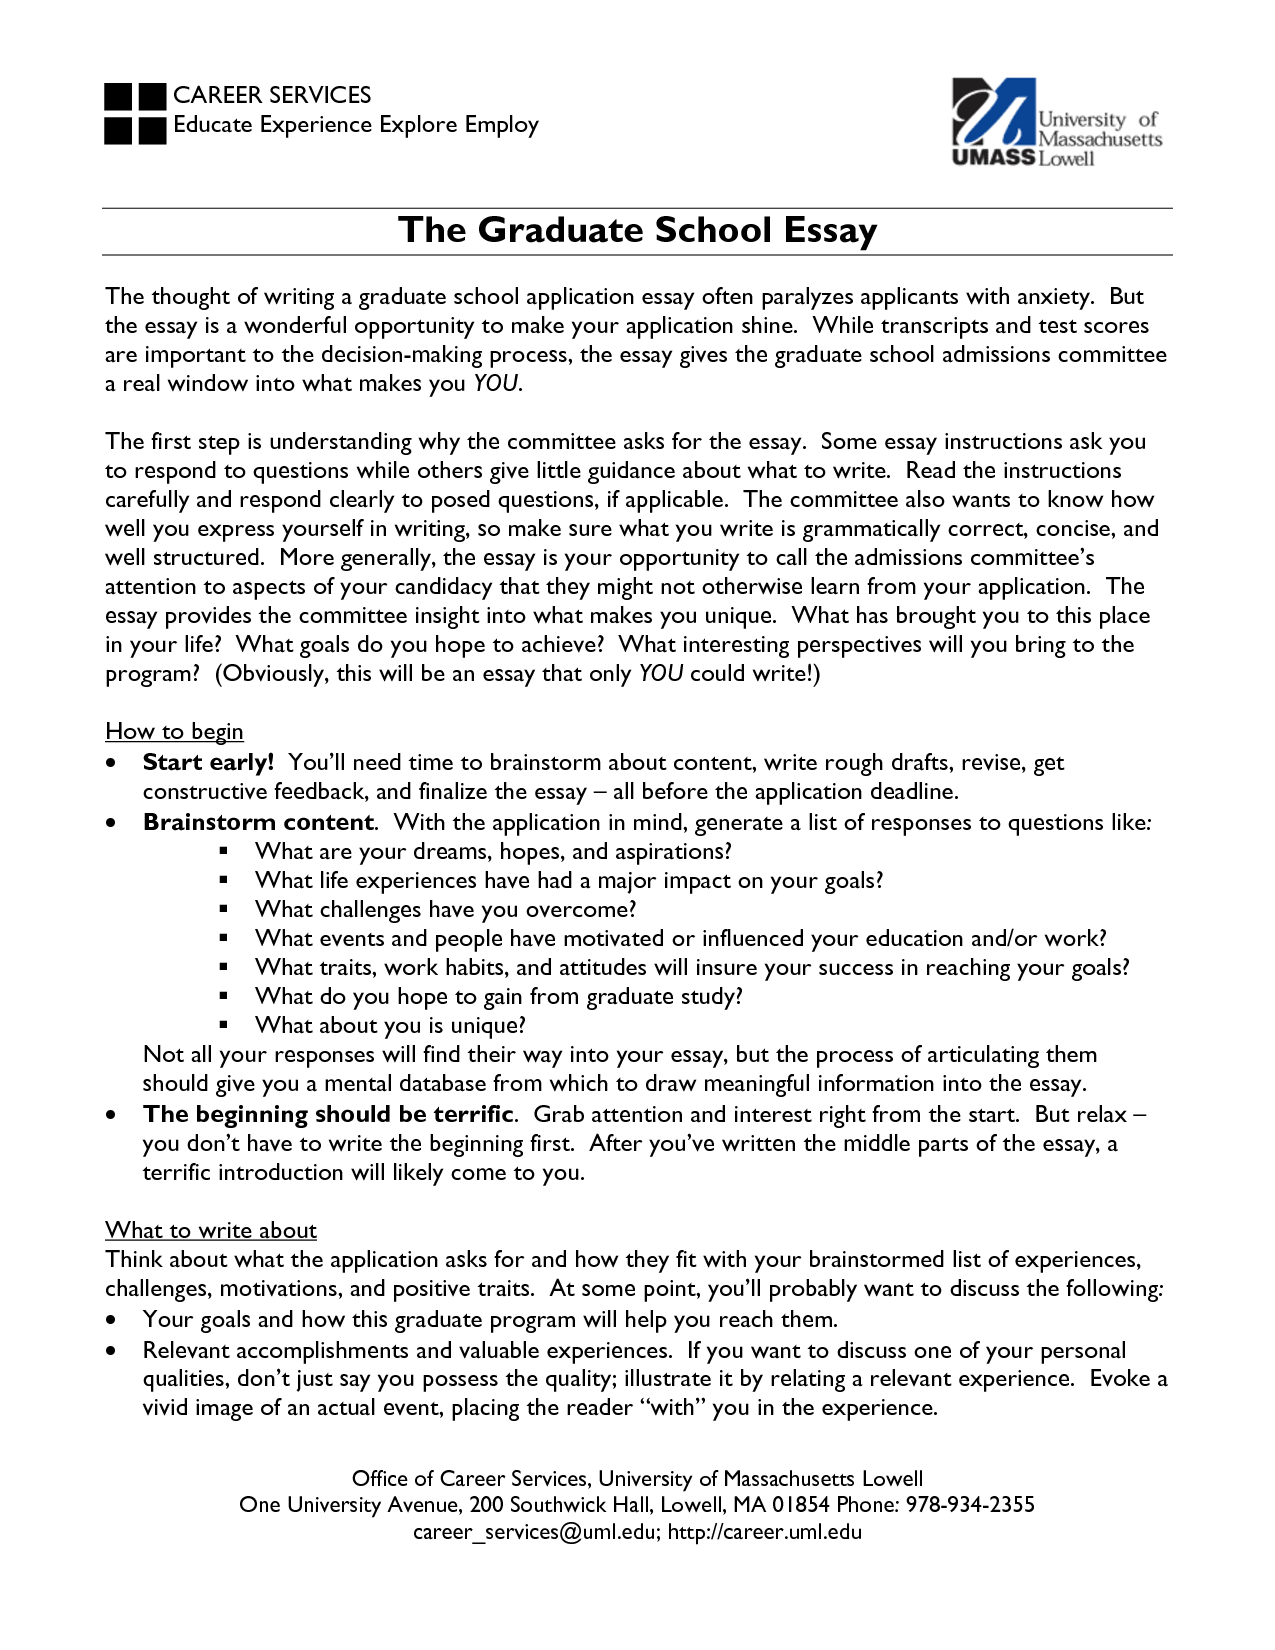 Writing an essay for college application graduate school